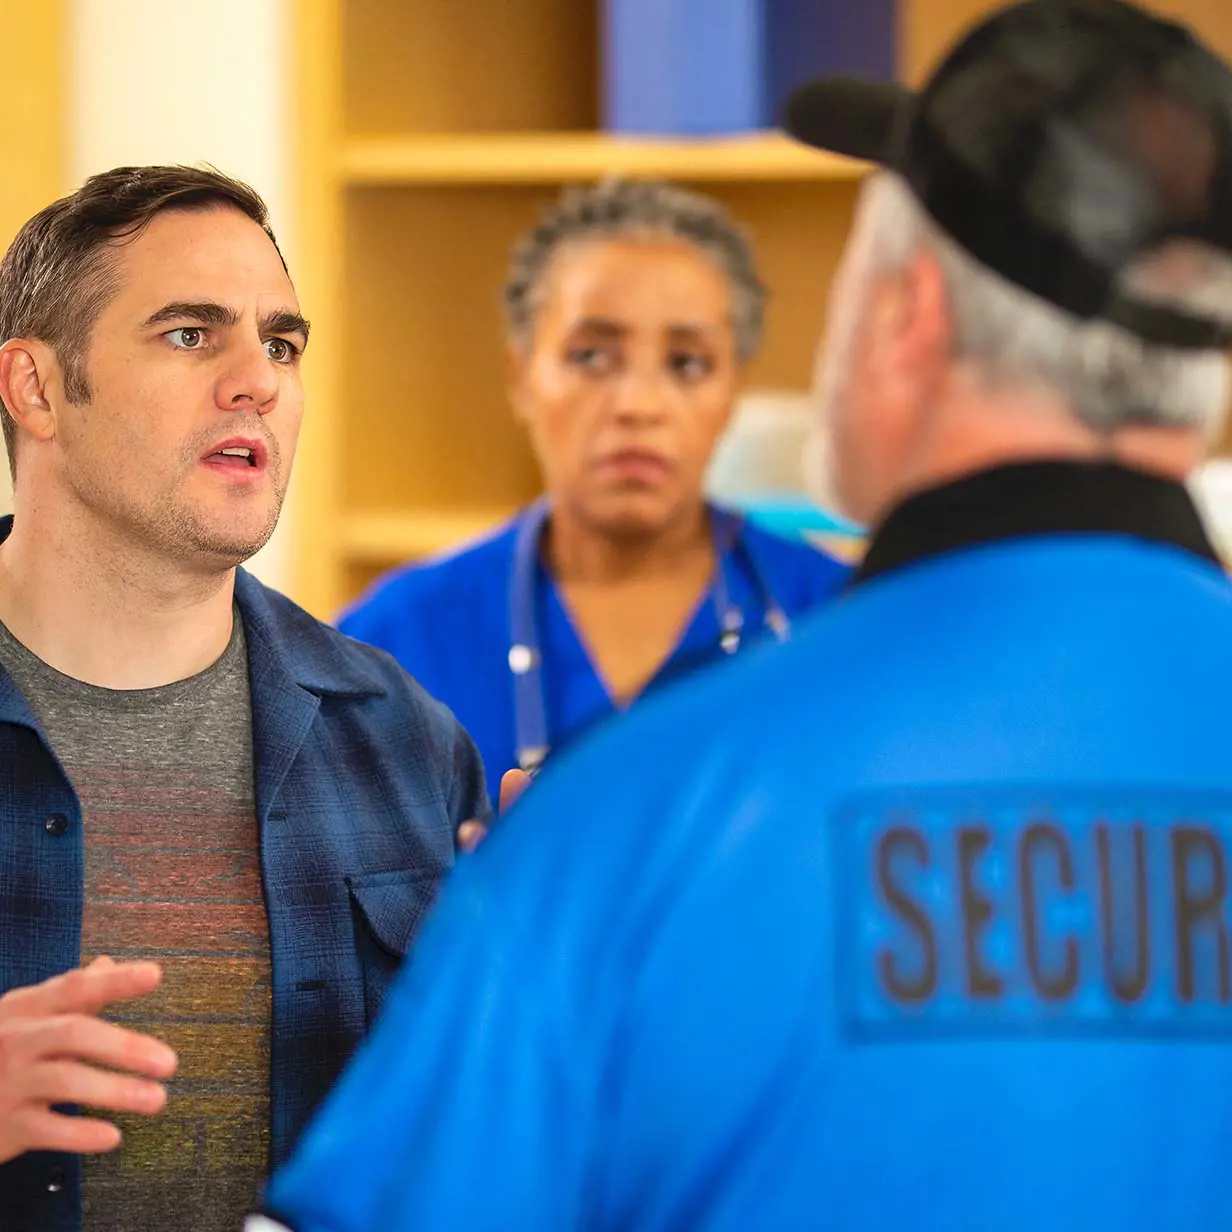 Security officer talking to an upset patient with a nurse in the background.